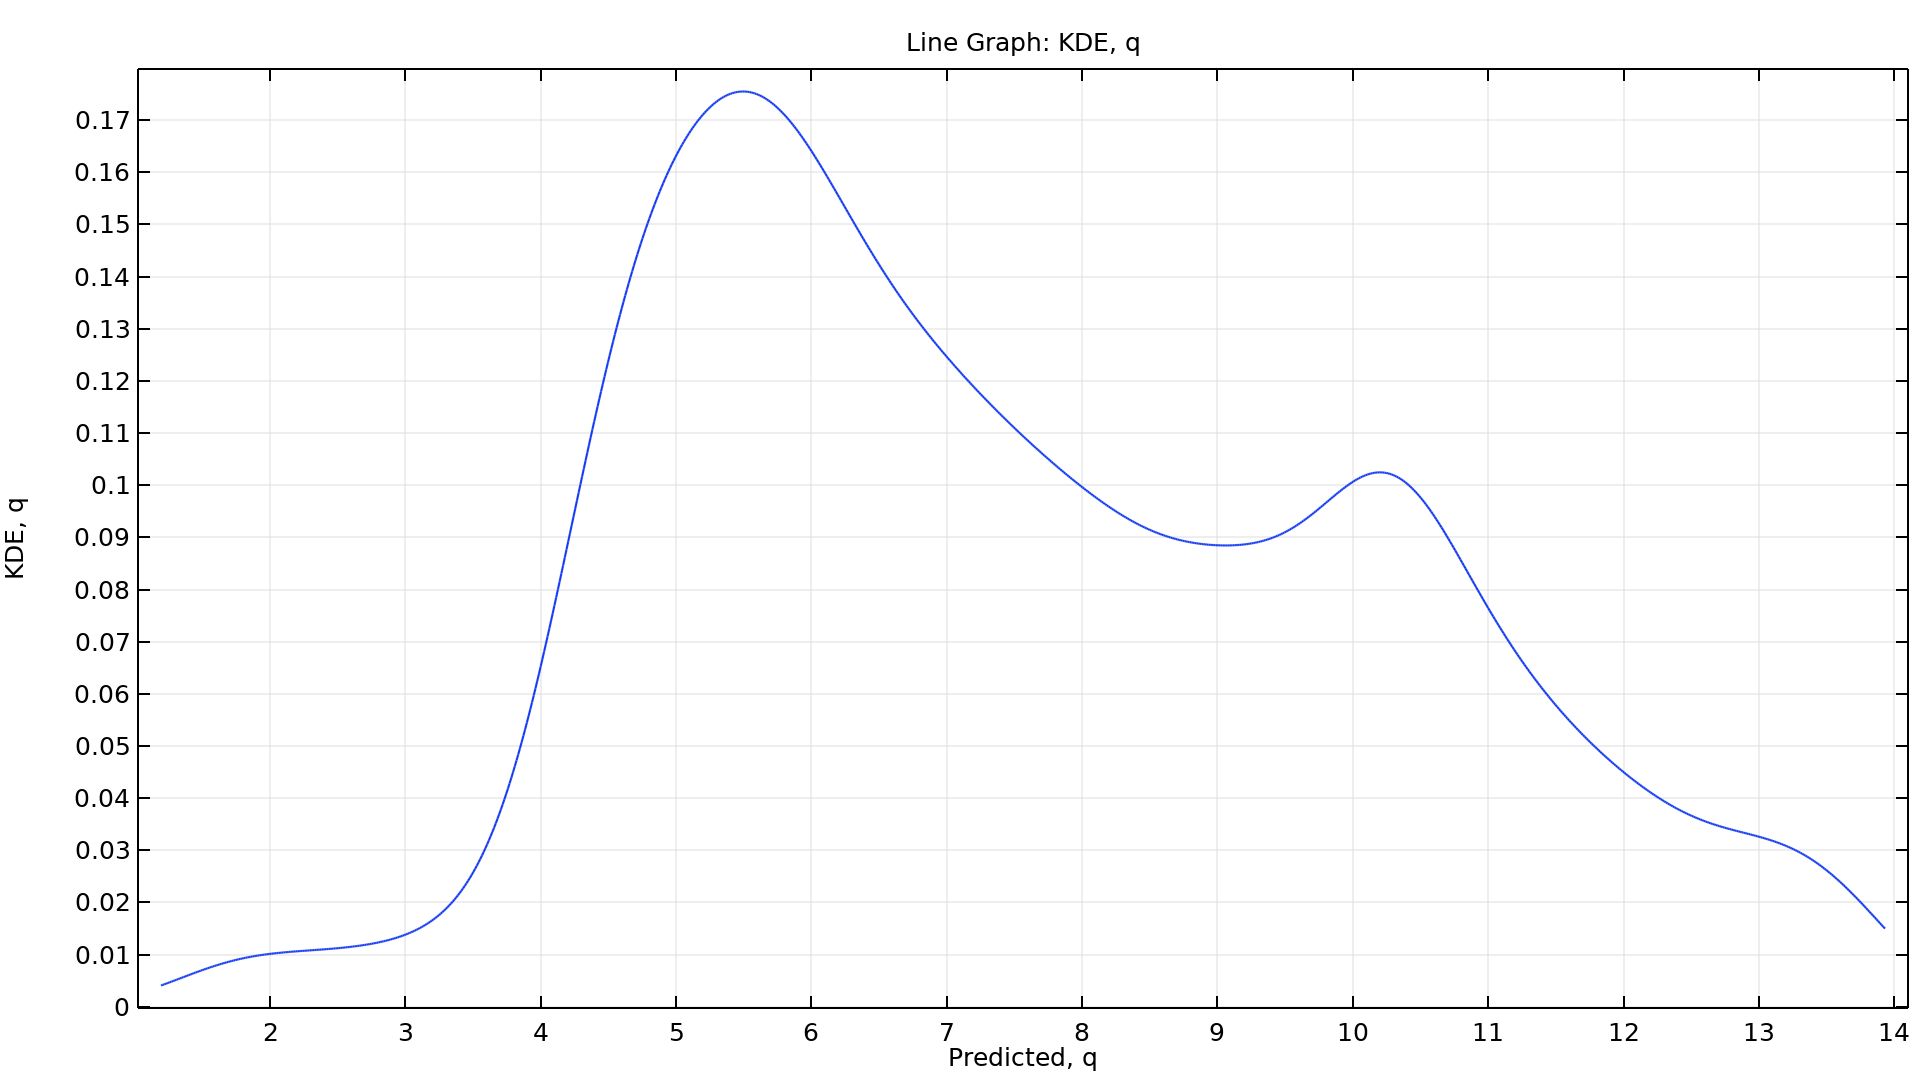 A kernel density estimation line graph with KDE as the y-axis and Predicted as the x-axis.